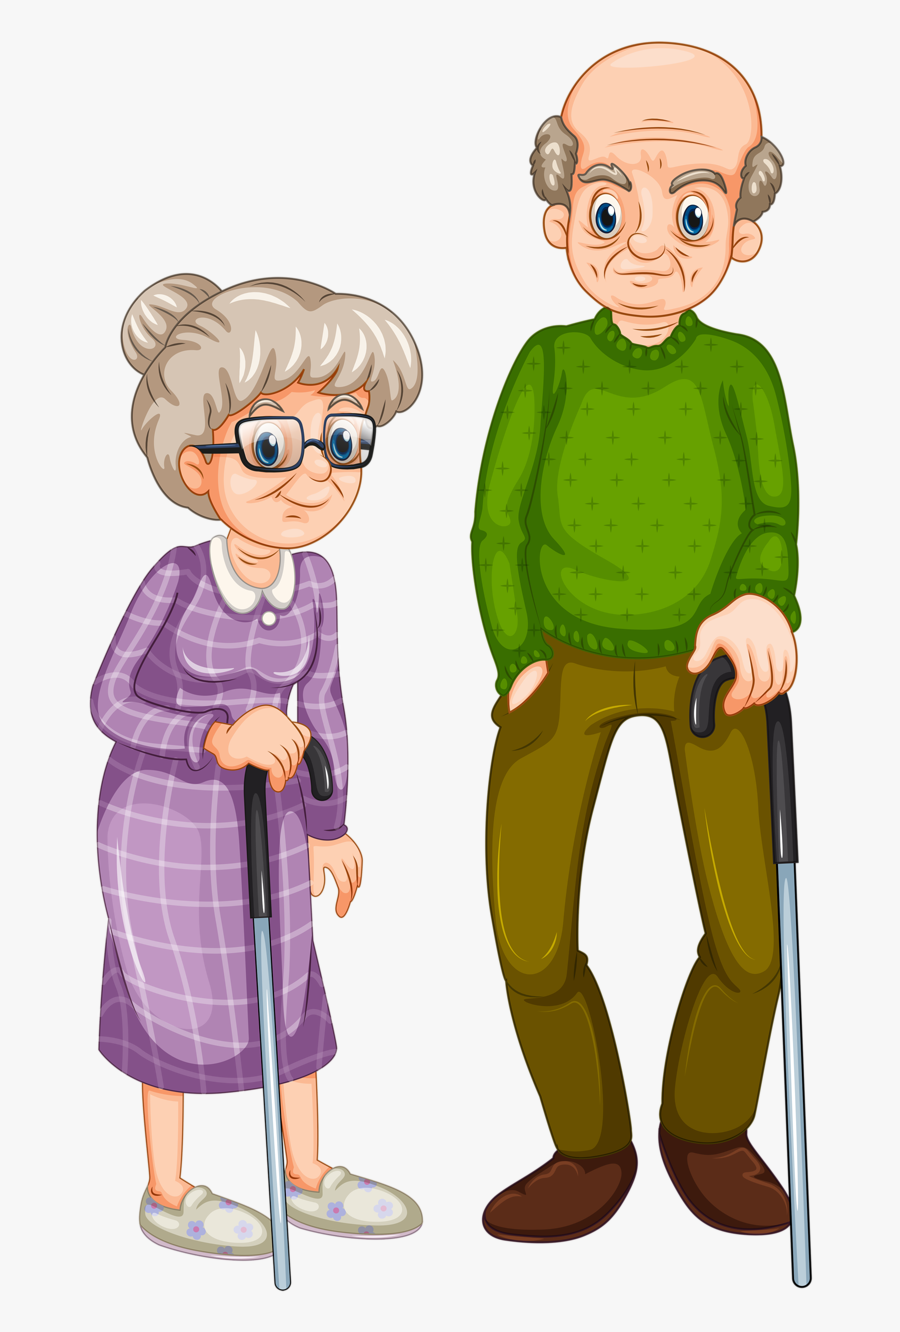 Png Etsy Shopping - Grandmother And Grandfather Clipart, Transparent Clipart